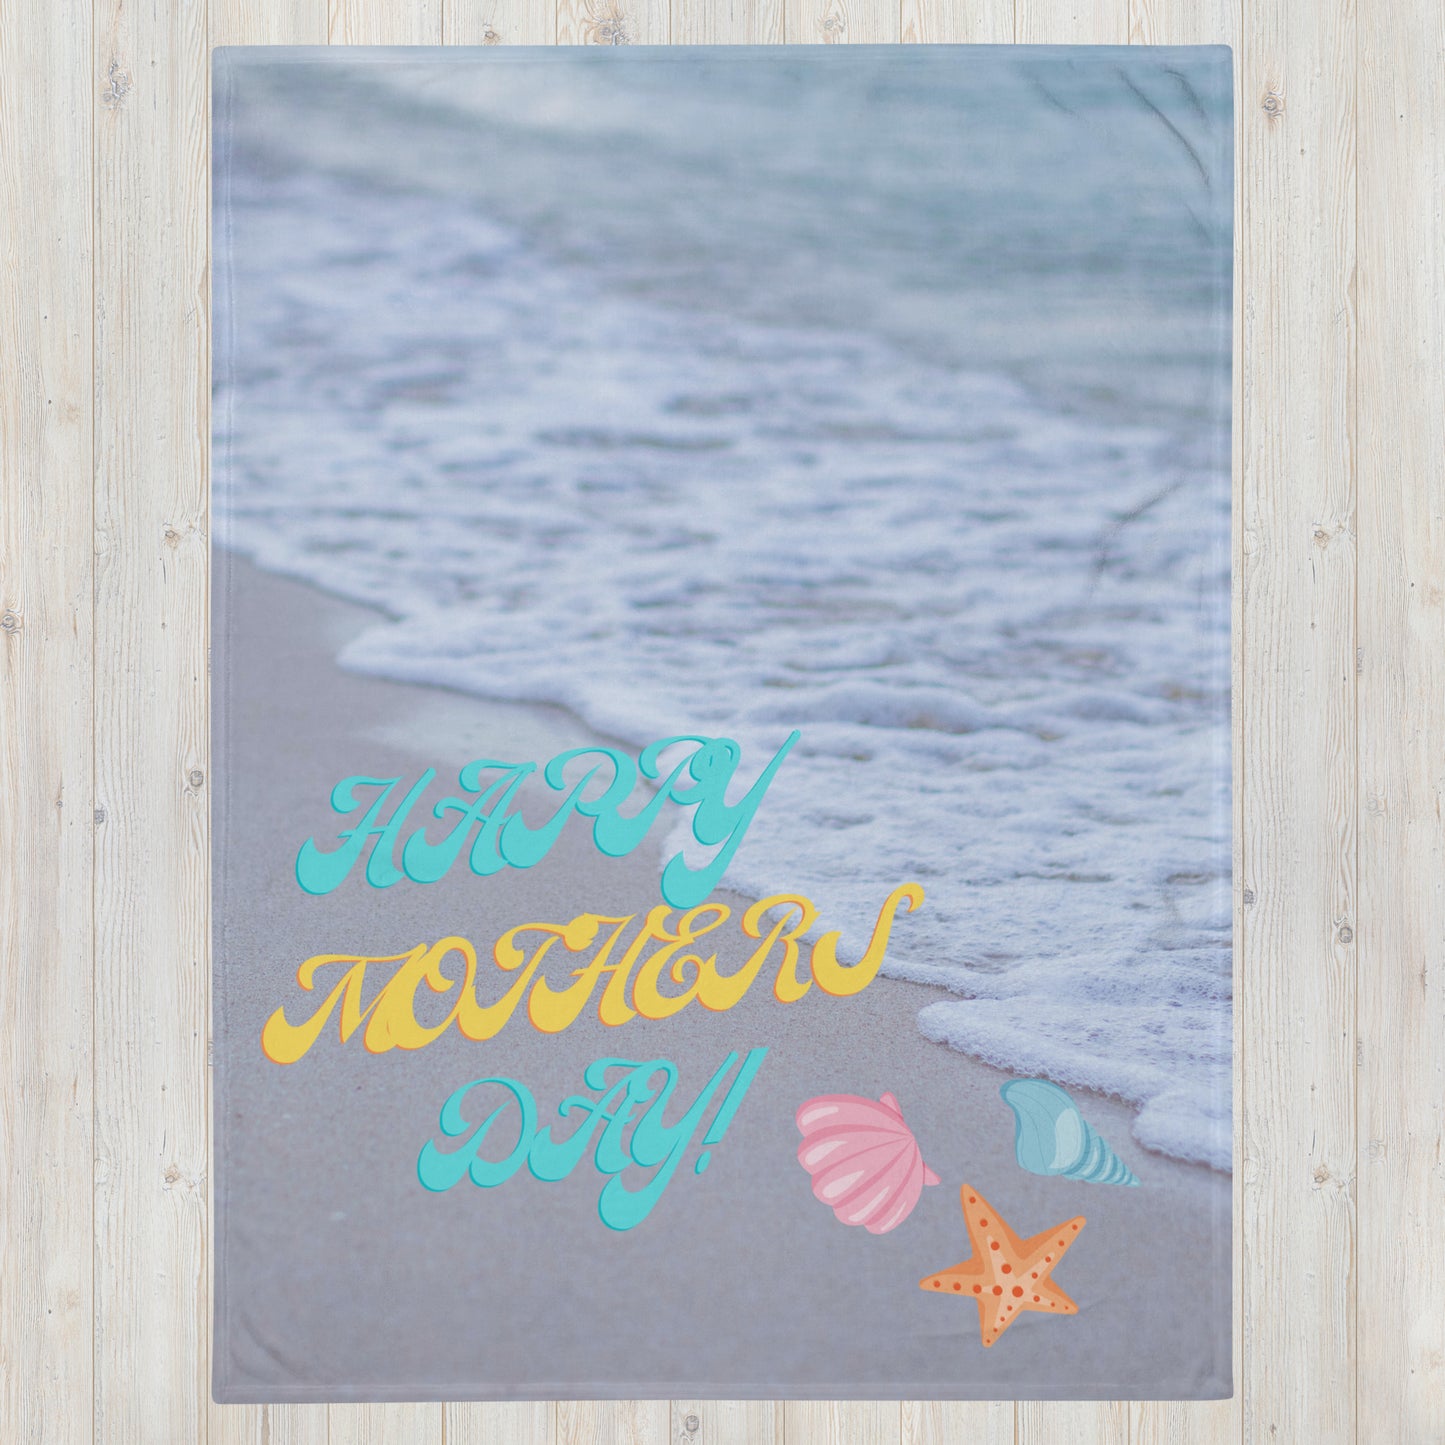 Throw Blanket - Happy Mothers Day Beach  60x80 Inch